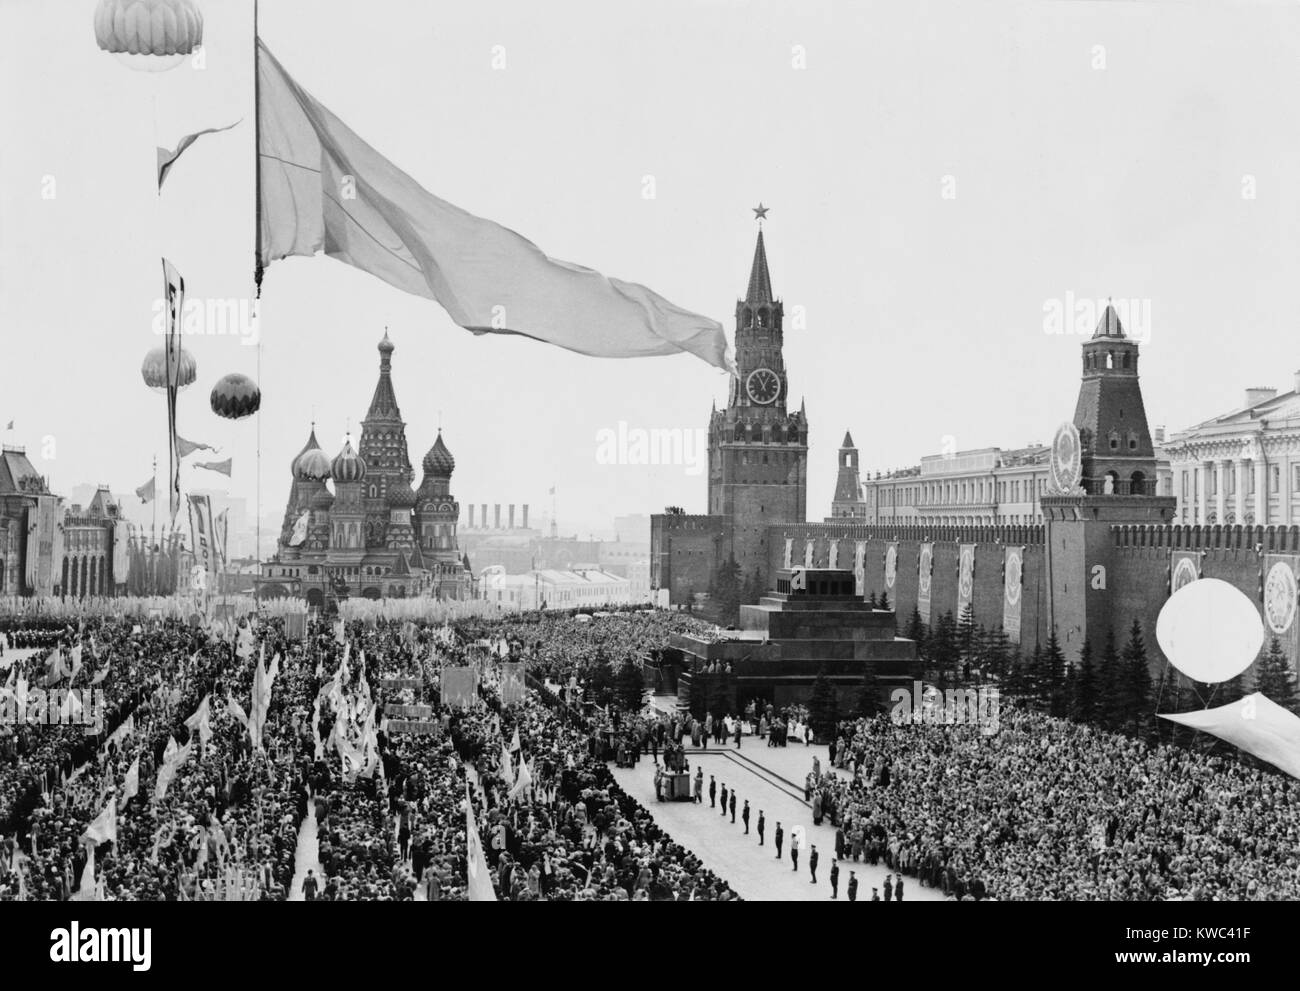 Moscow Celebration of May Day, 1960. Demonstrating Workers fill Red Square before Lenin's Tomb and the Kremlin Wall. (BSLOC 2015 14 3) Stock Photo